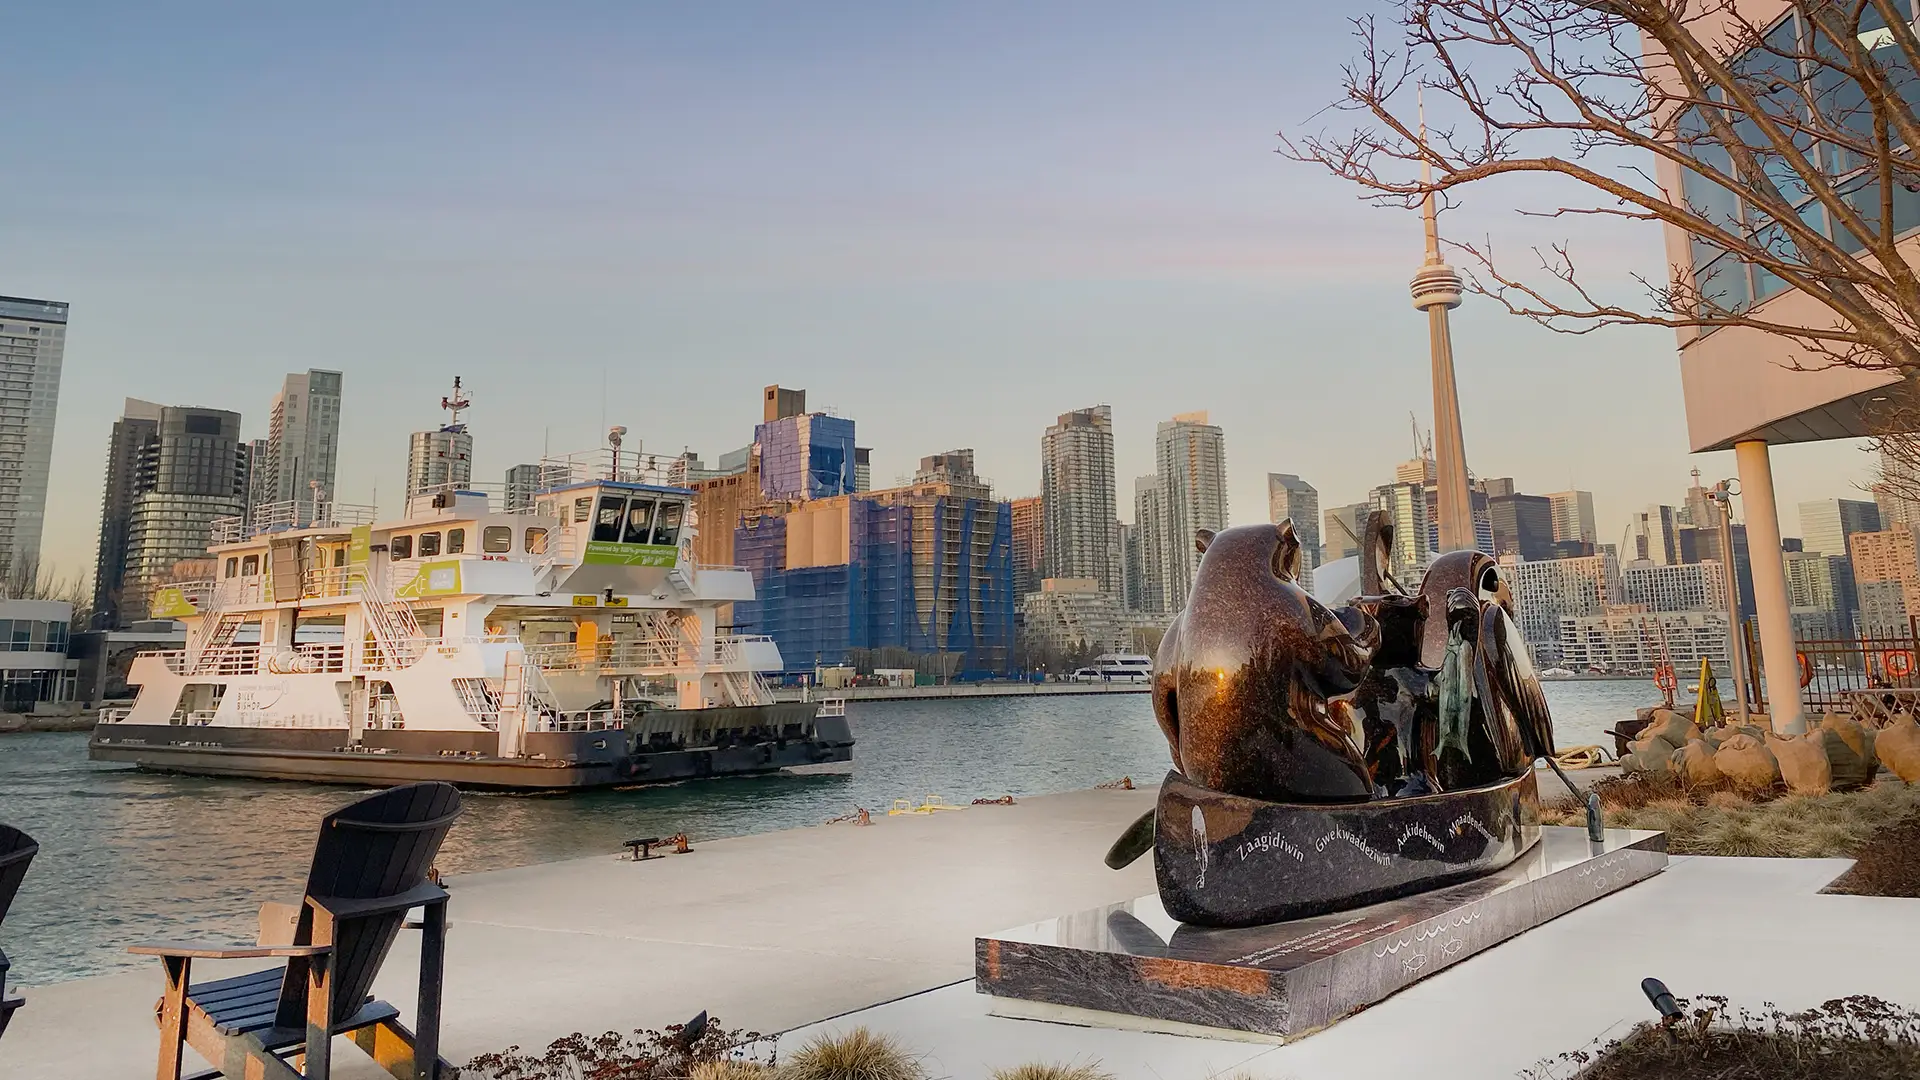 Ferry and the city of Toronto in the background with a sculpture in the foreground